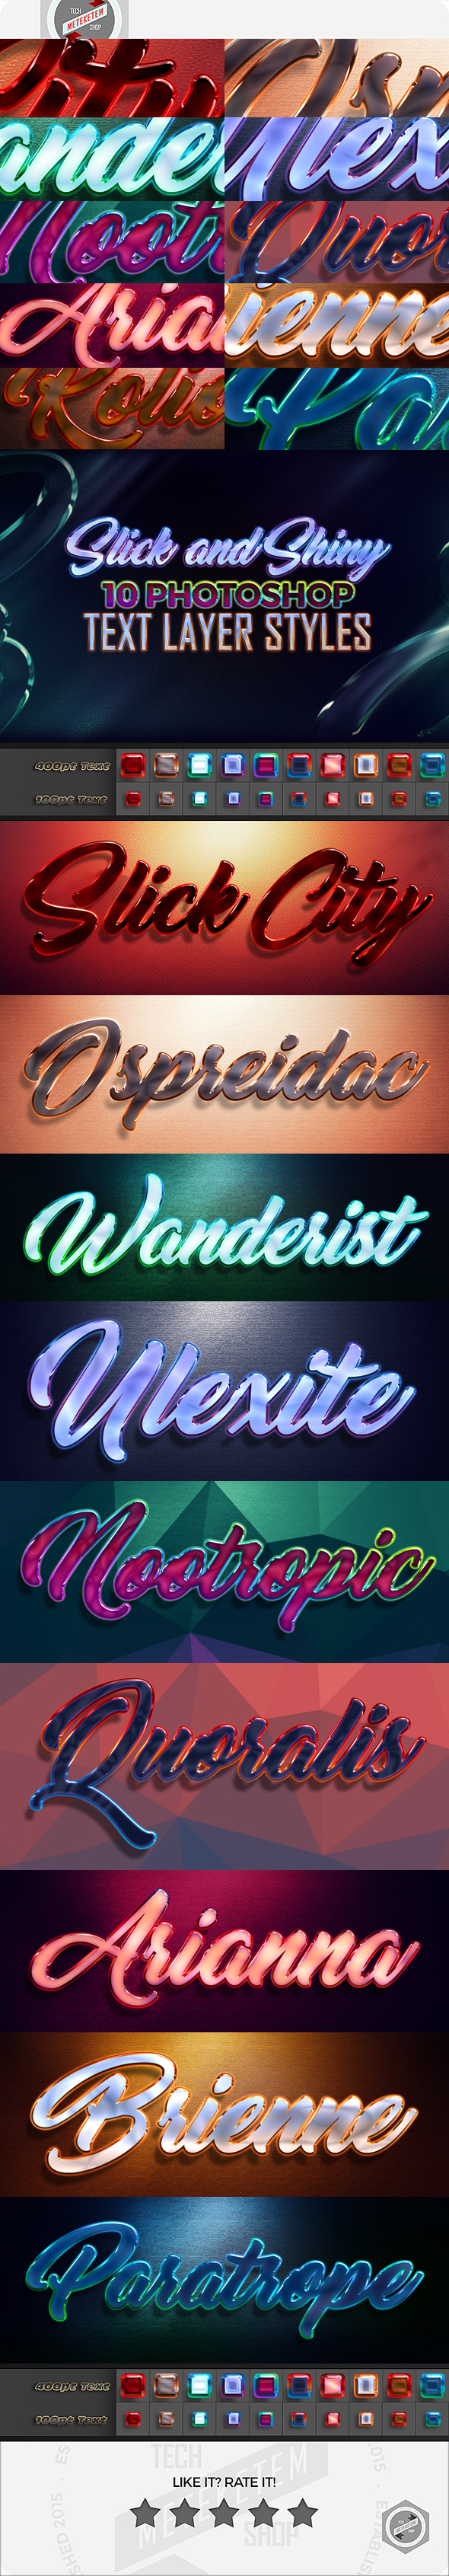 Slick and Shiny Text Layer Style - Pack 1